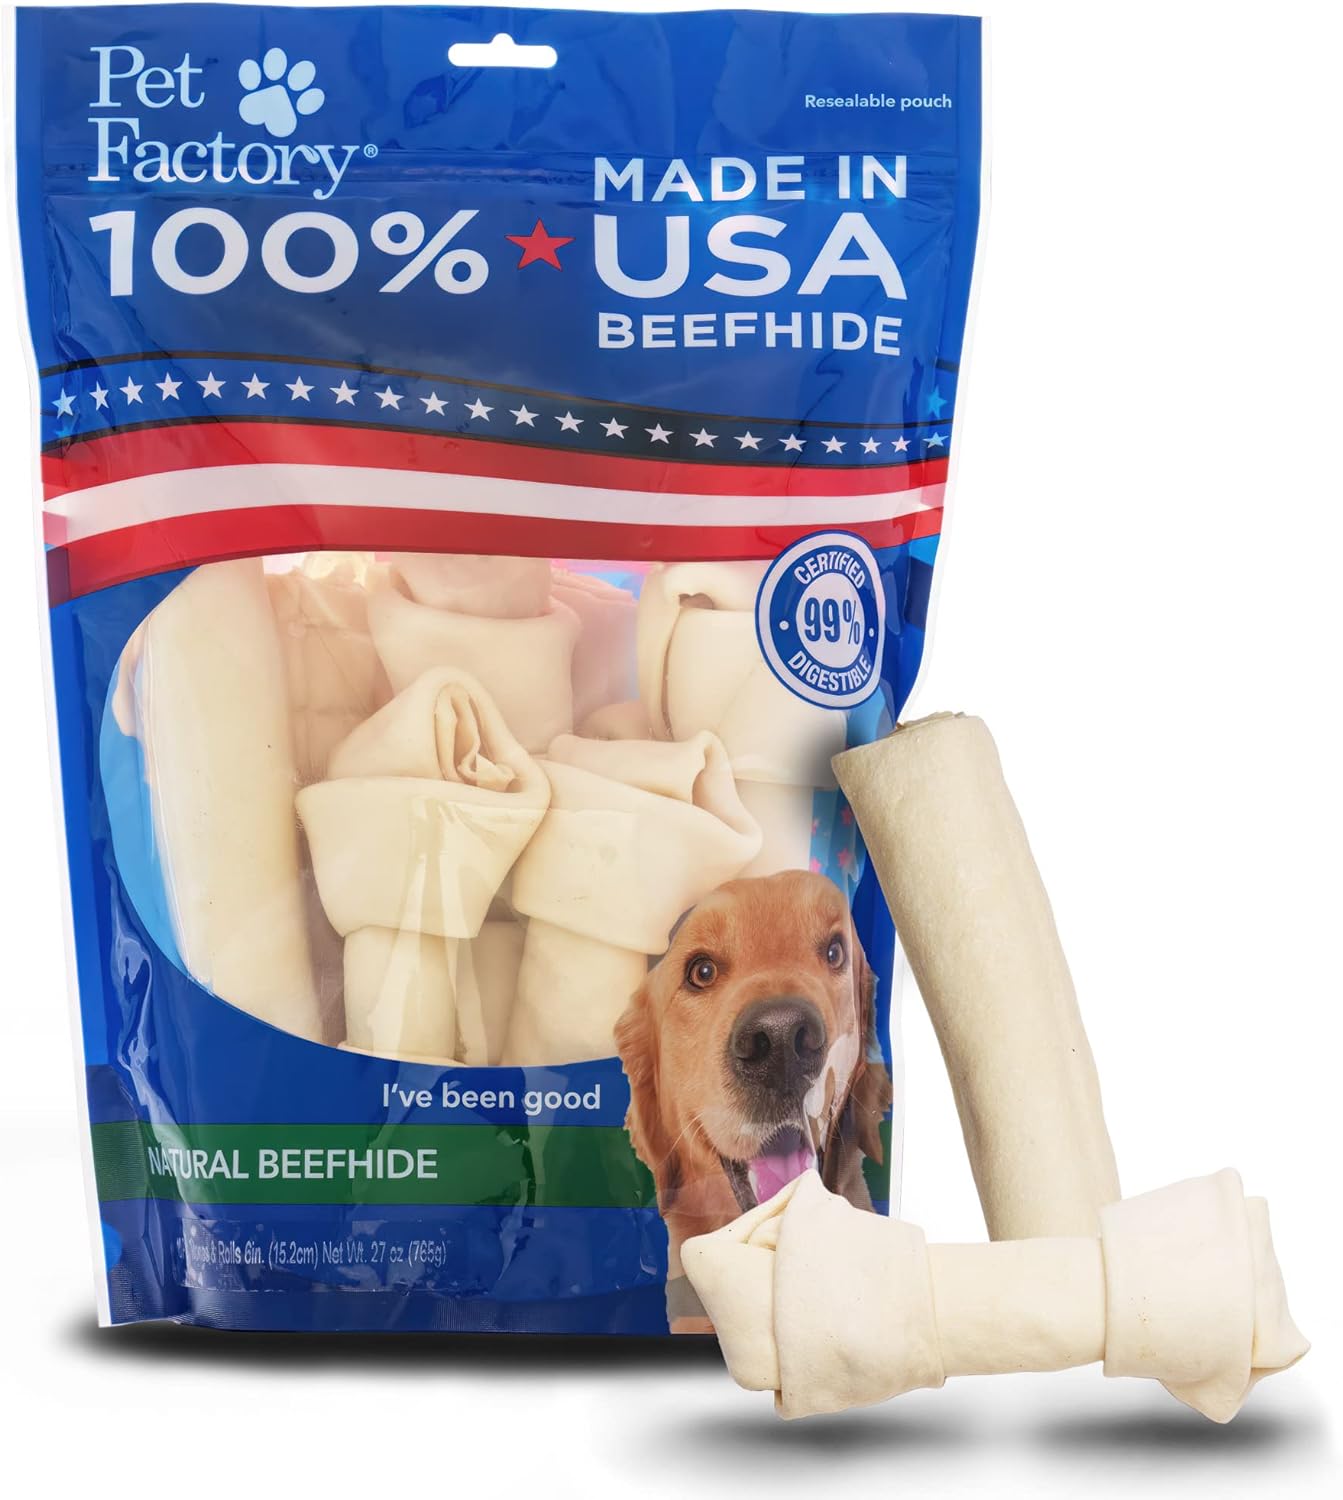 Pet Factory 100% Made in USA Beefhide 6-7" Assorted (Bones & Rolls) Dog Chew Treats - Natural Flavor, 10 Count/1 Pack